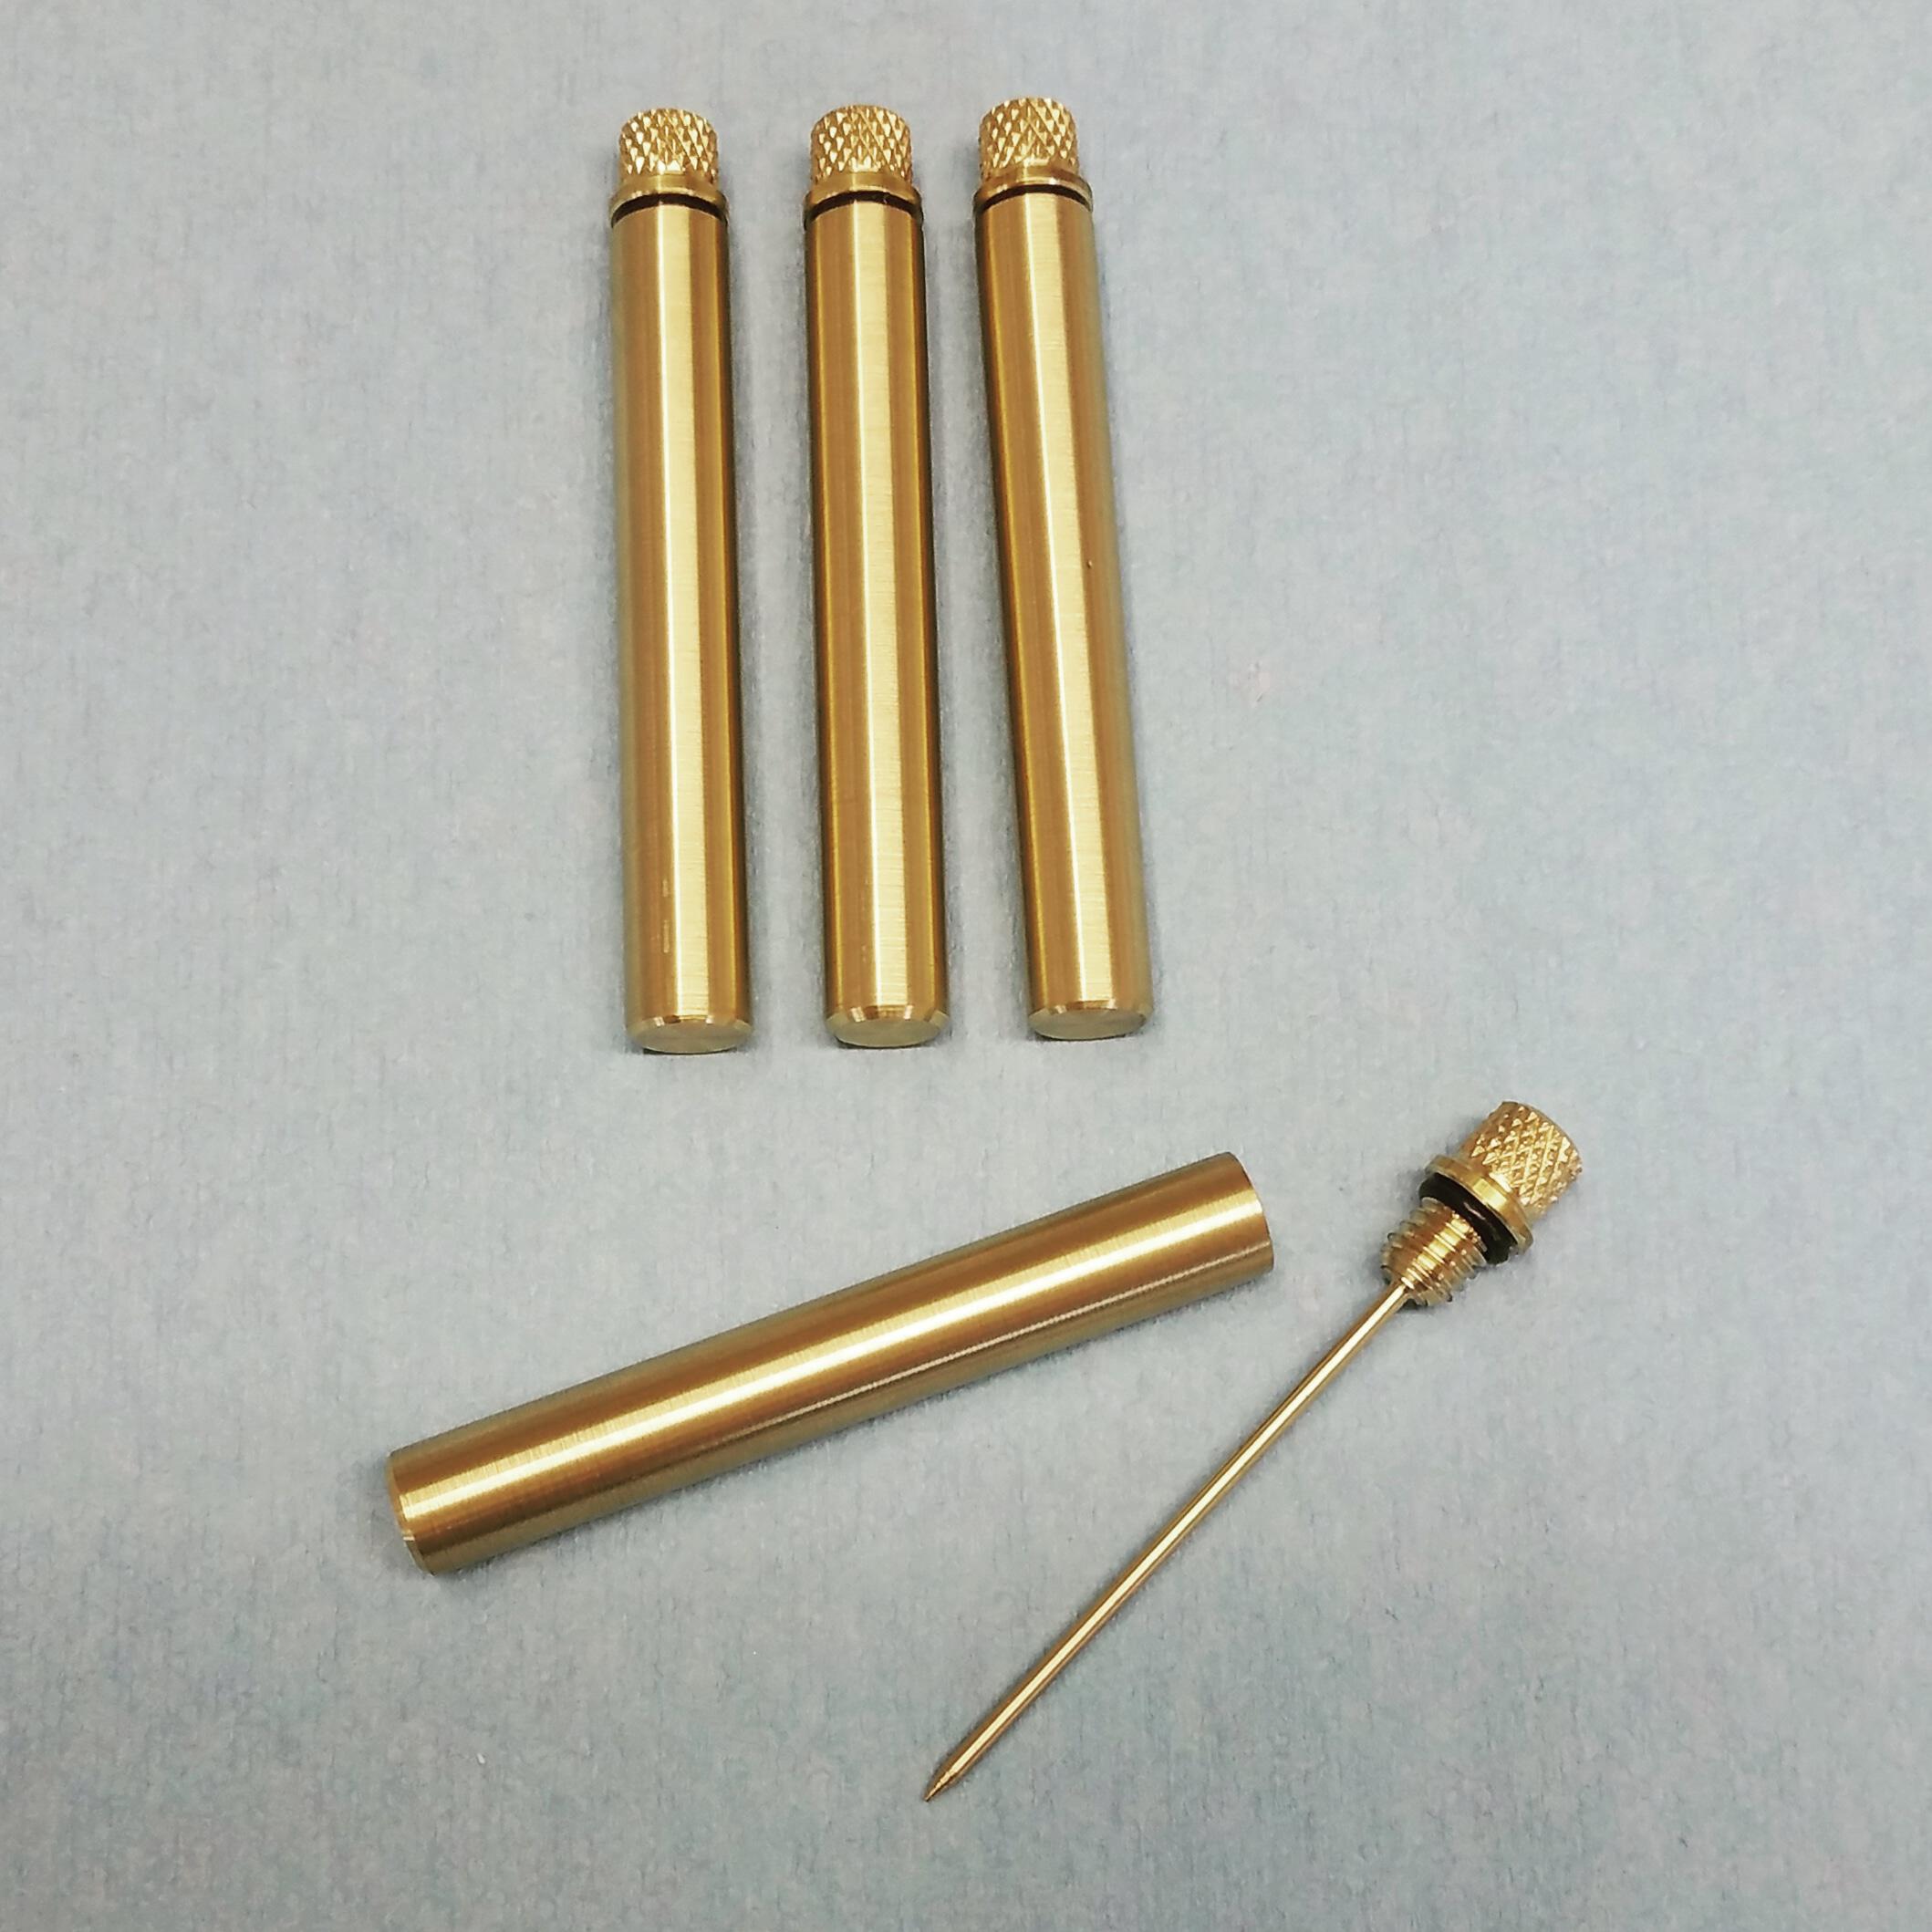 Handmade Supplies :: Sewing & Fiber :: Sewing Tools & Supplies :: Brass Precision  Oiler - Oil Bottle - Hand Machined in the USA